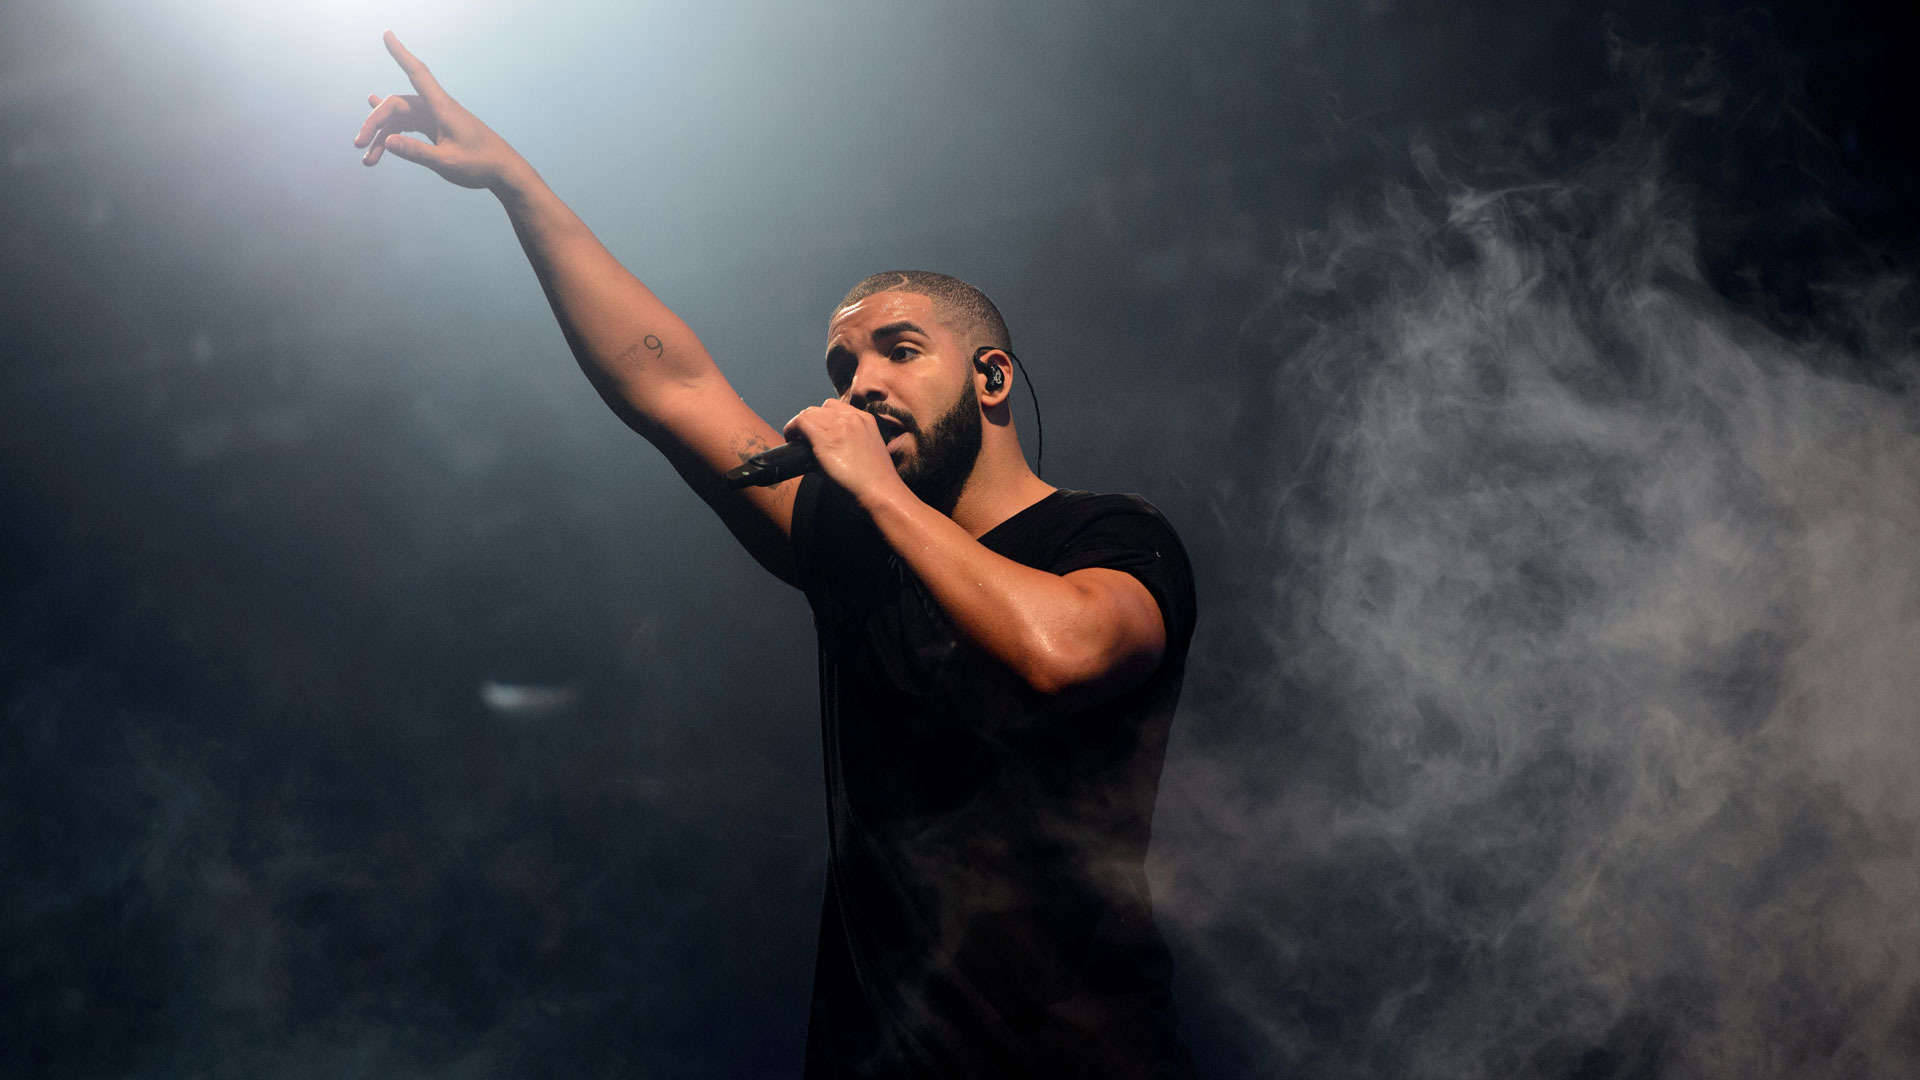 Drake Ovo Takes The Stage In An Energetic Performance Wallpaper